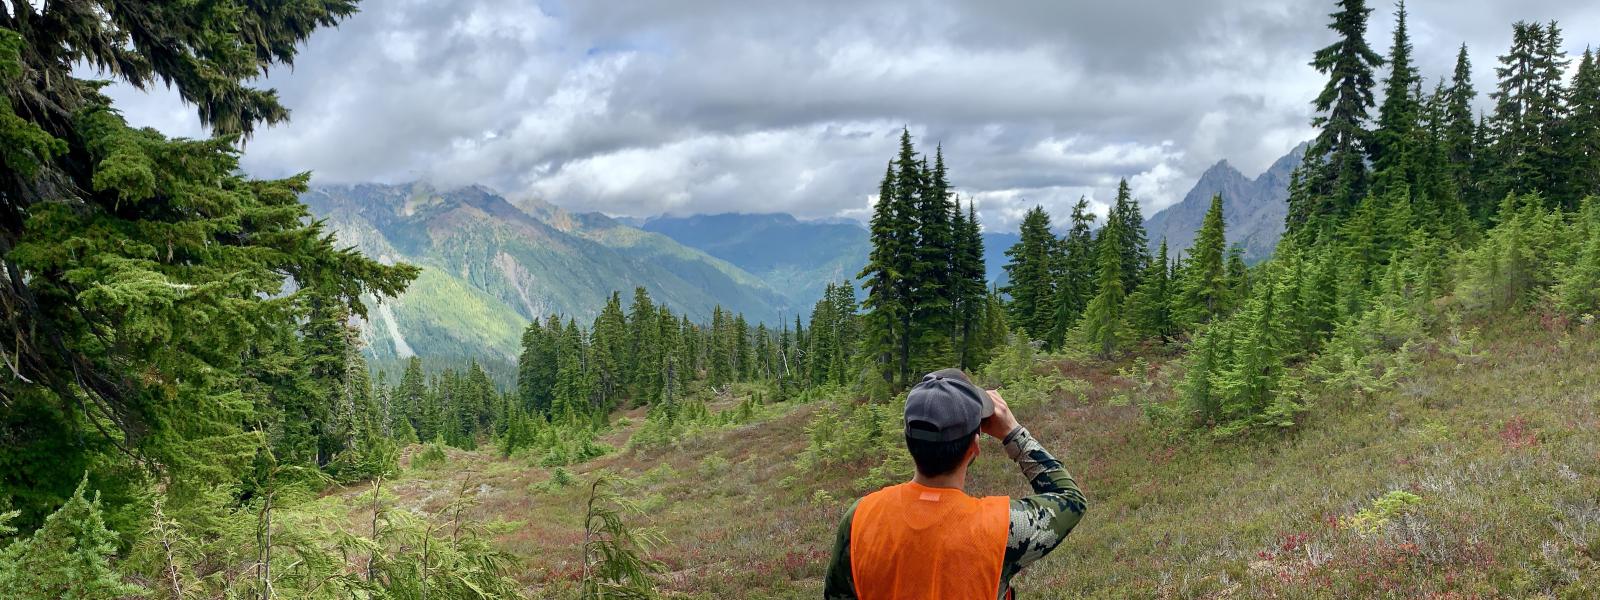 A hunter in an orange vest and a ball cap looking away from the camera towards a vast wilderness area